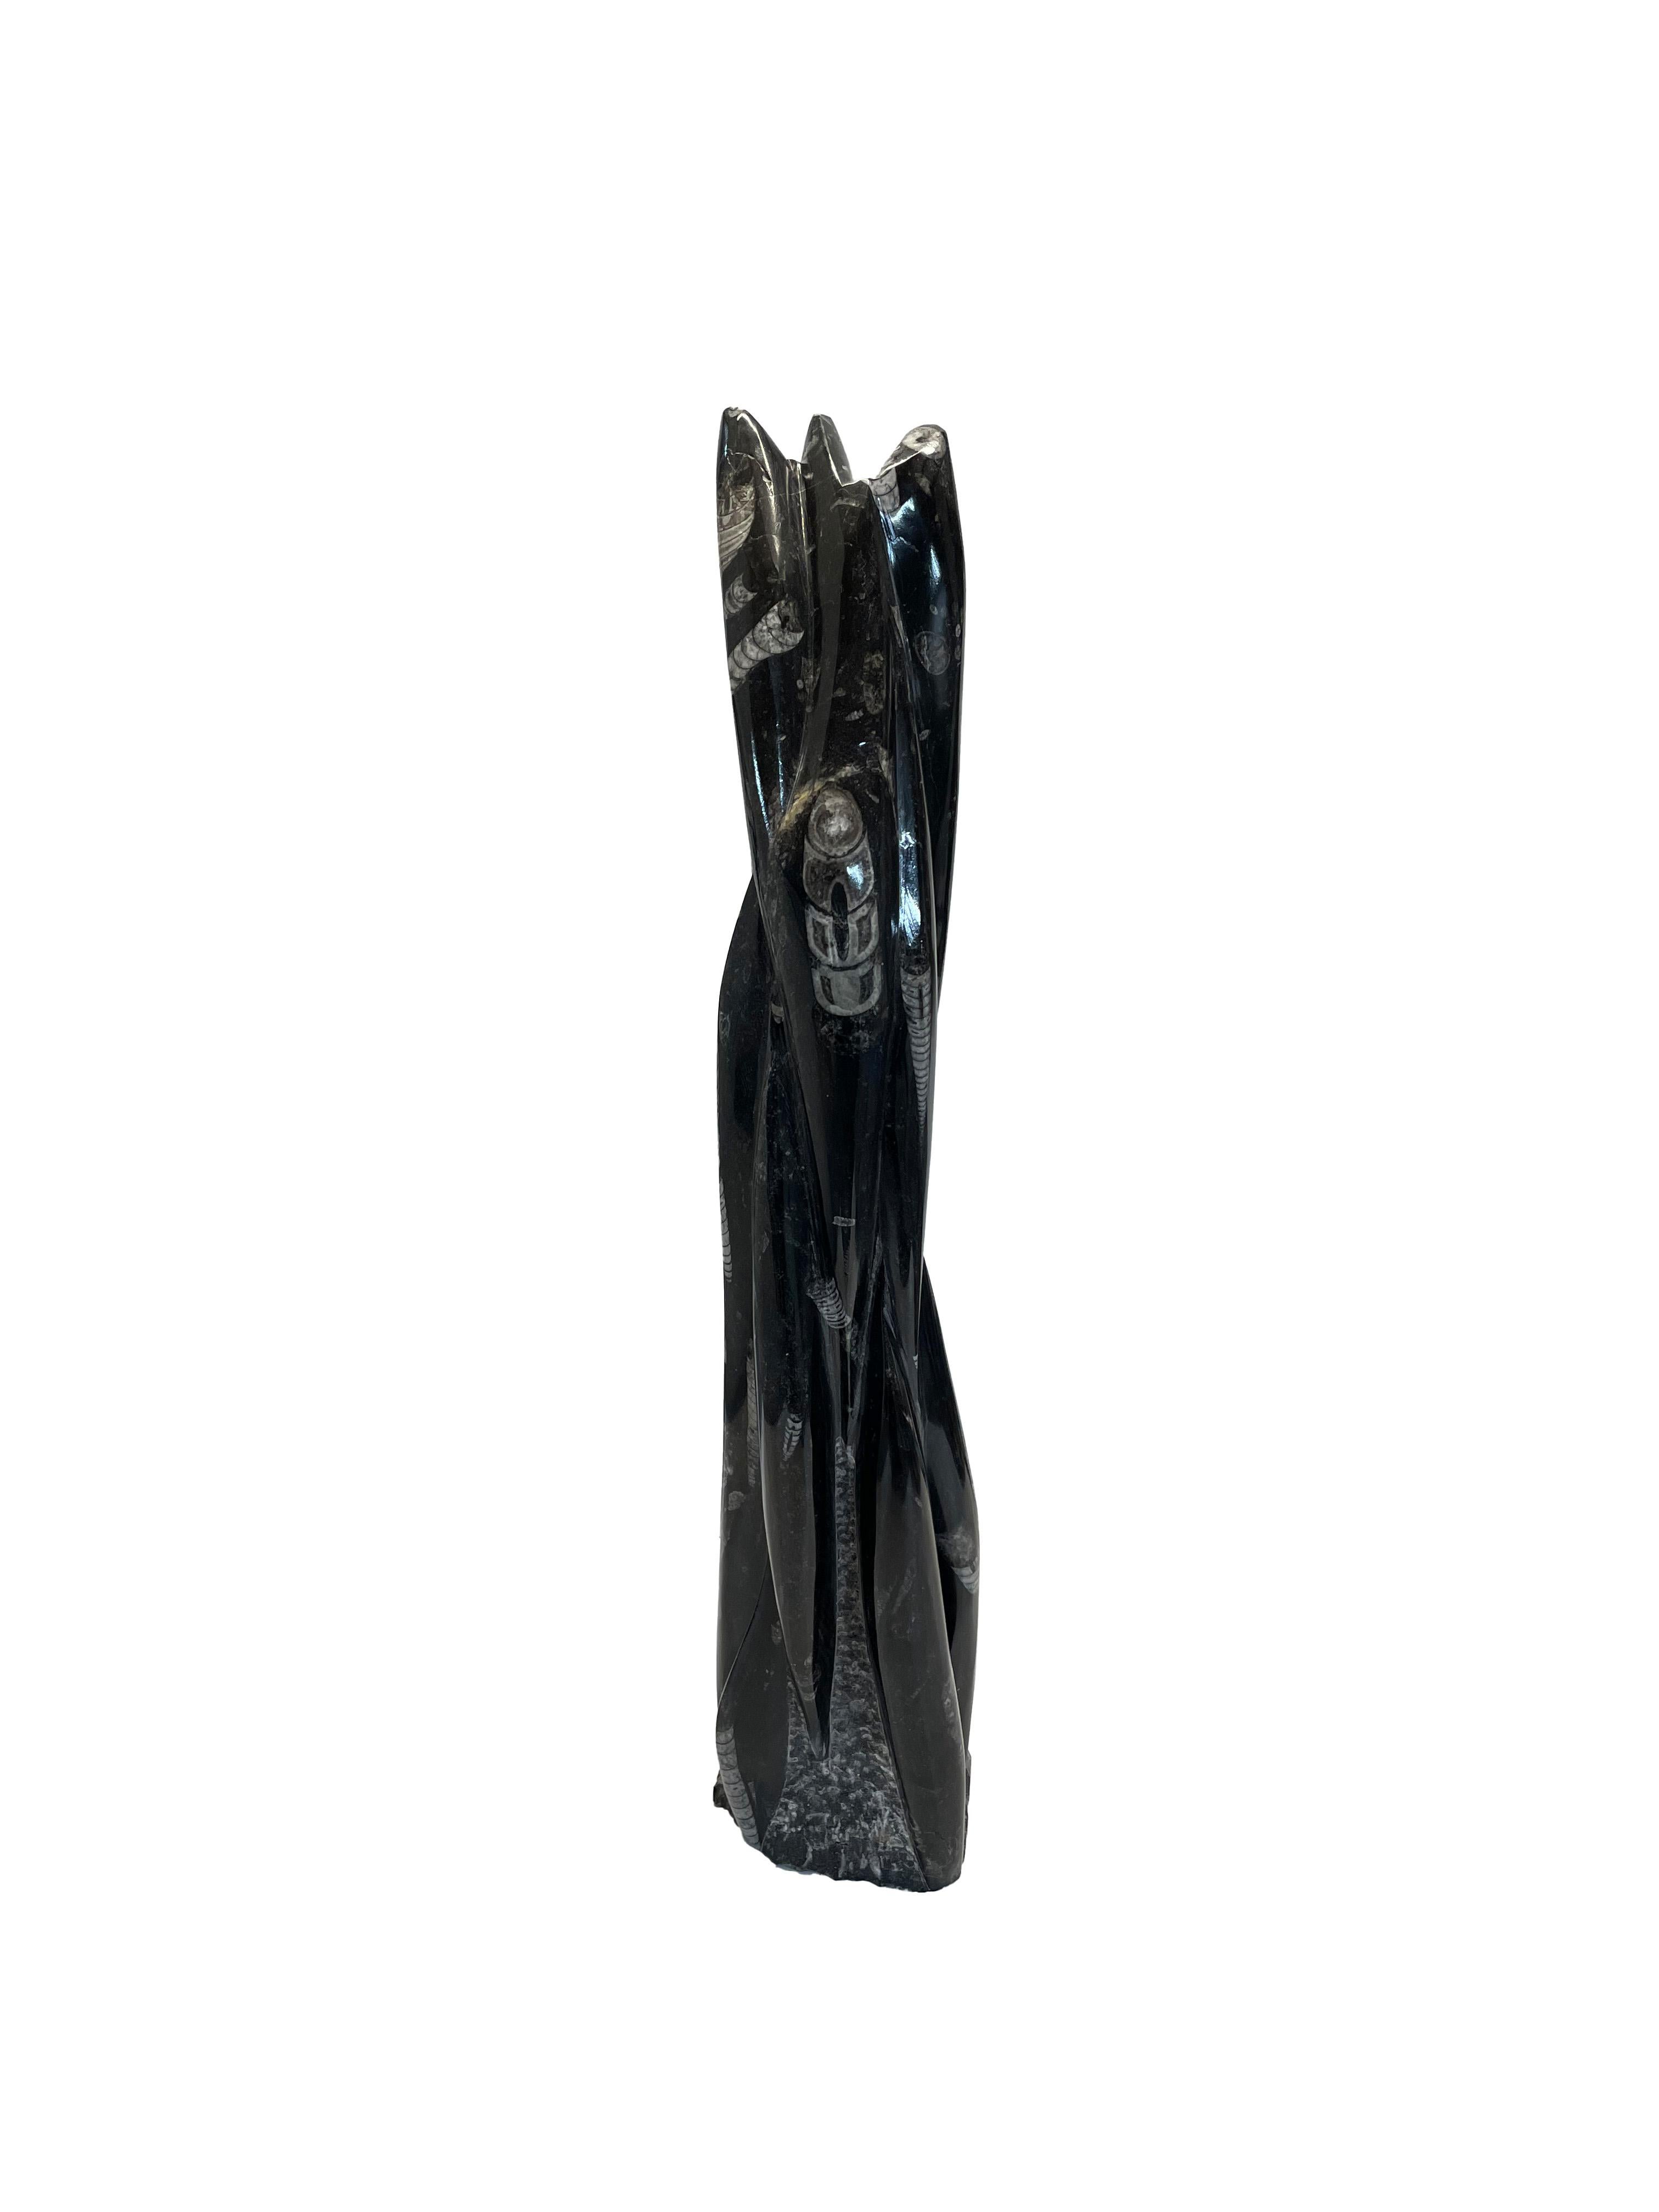 Unique granite sculpture with embedded fossils that are more than 280 million years old.
This beautiful, black granite tower with its beautiful Orthoceras fossils is a sculpture that captivates every viewer.

The fossils come from the Cretaceous